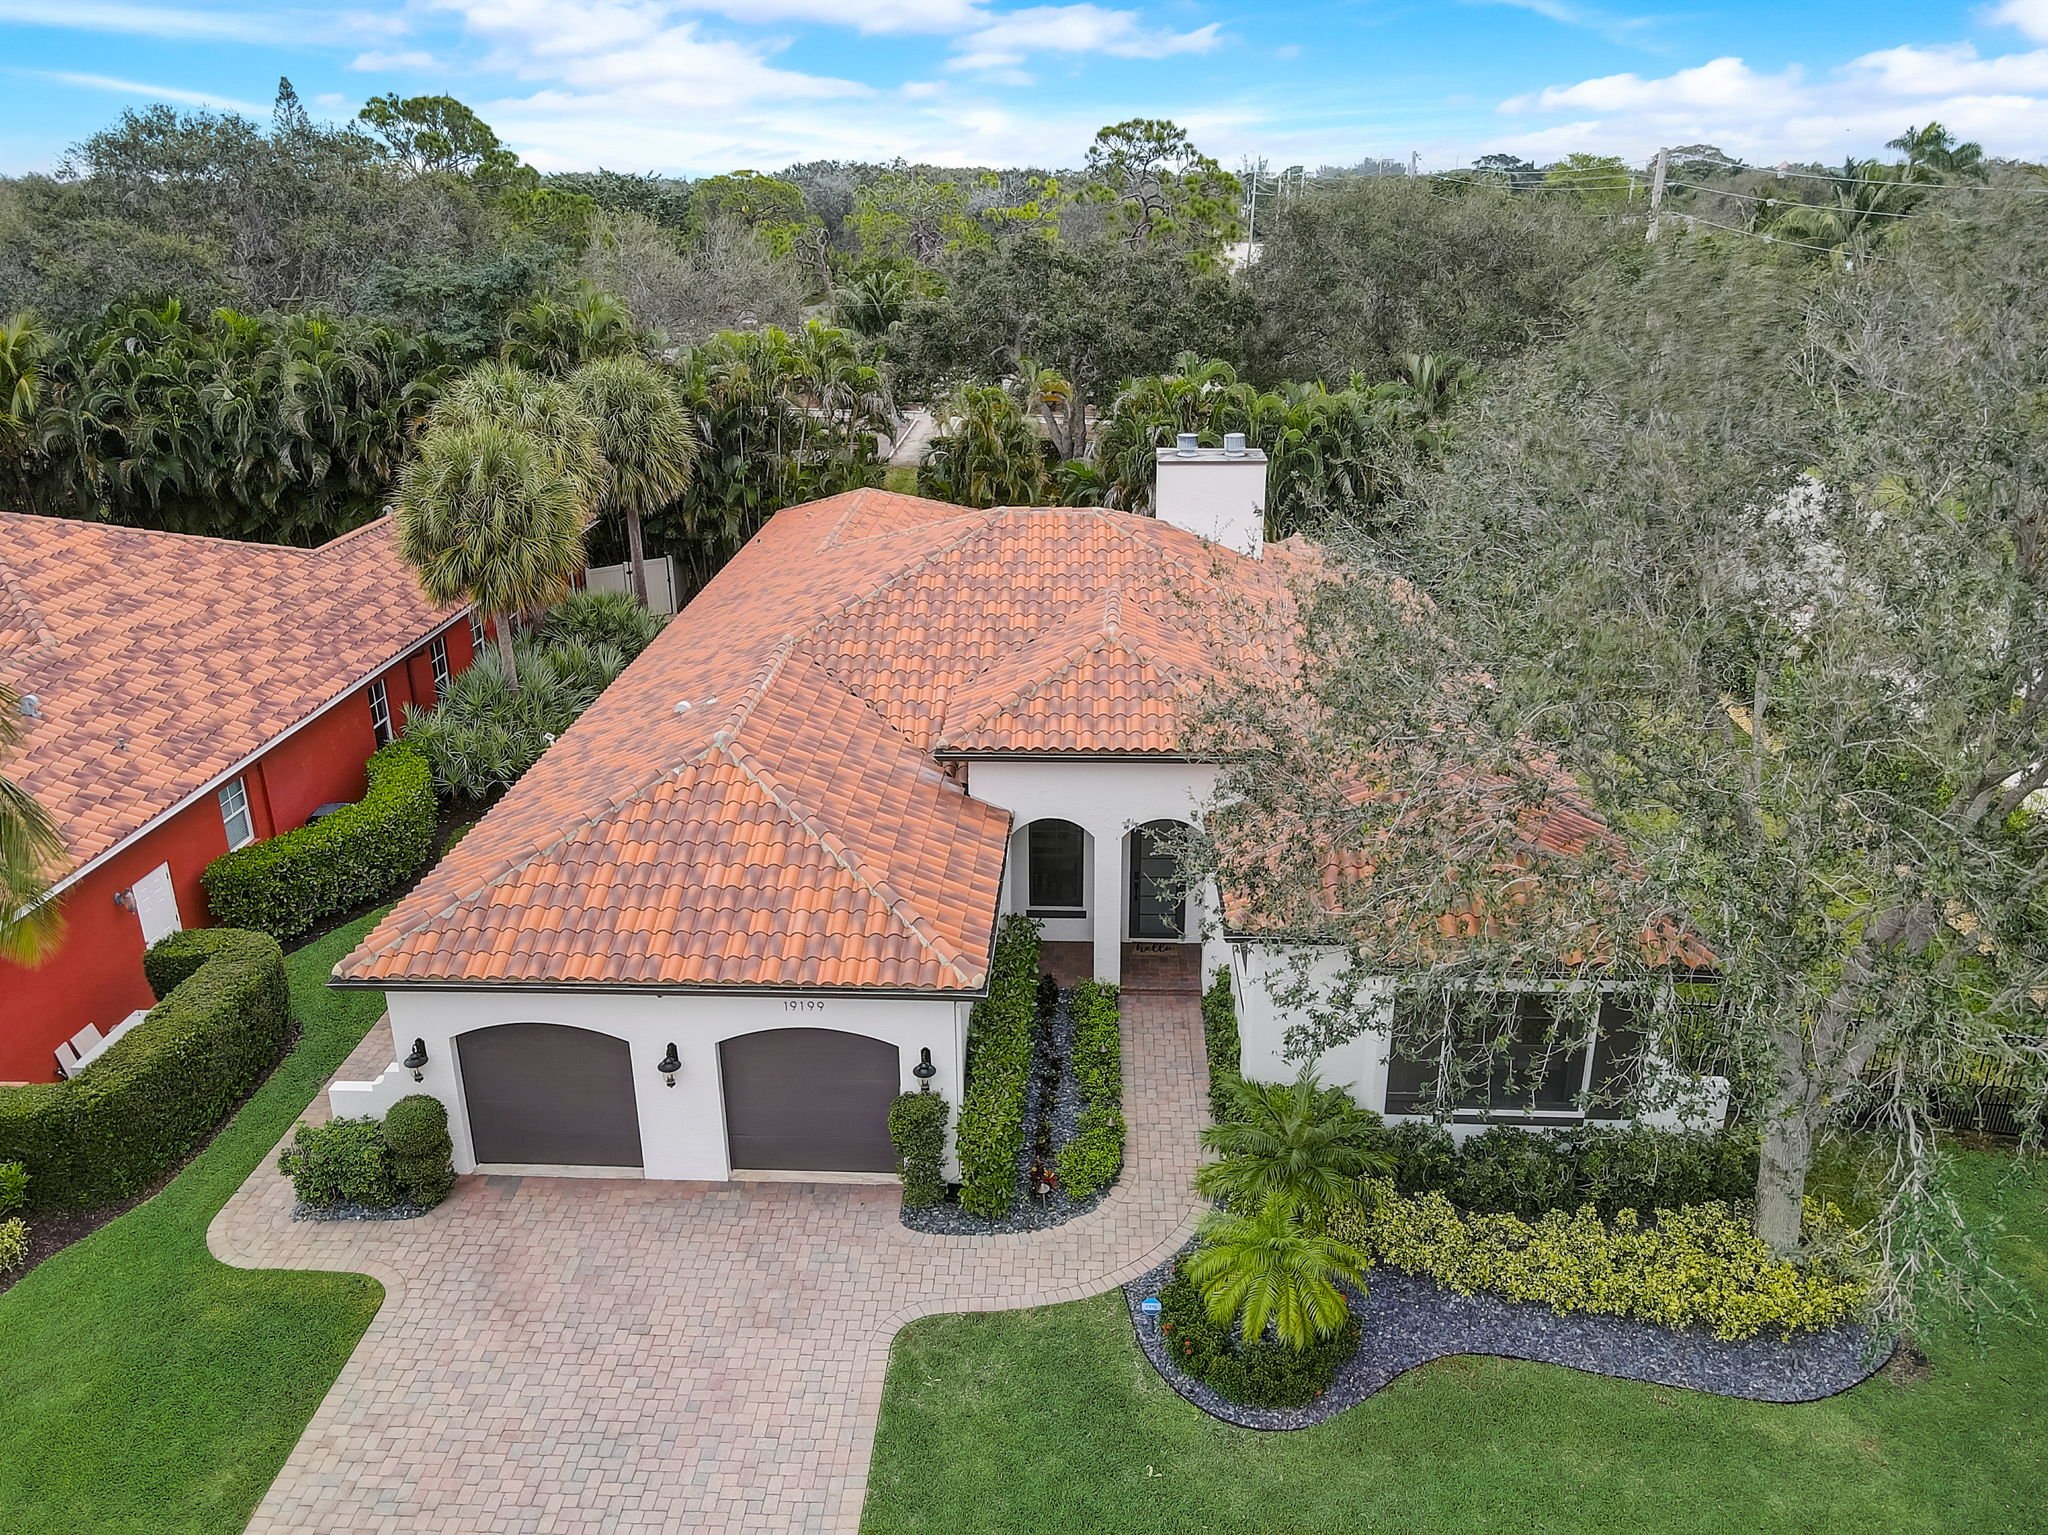 Luxury Home for sale in the heart of Tequesta Florida